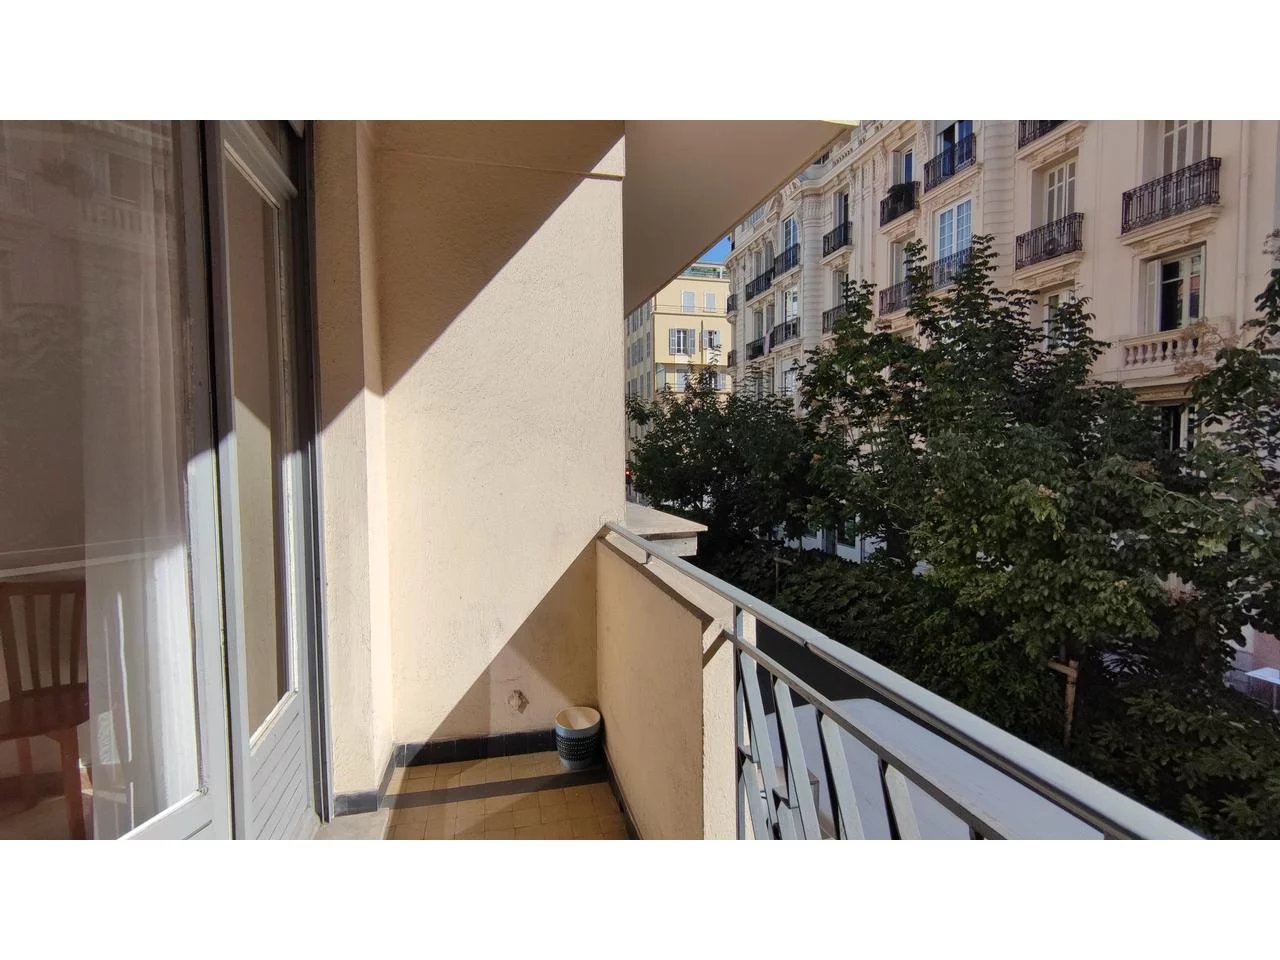 Appartement  3 Rooms 68m2  for sale   516 000 €